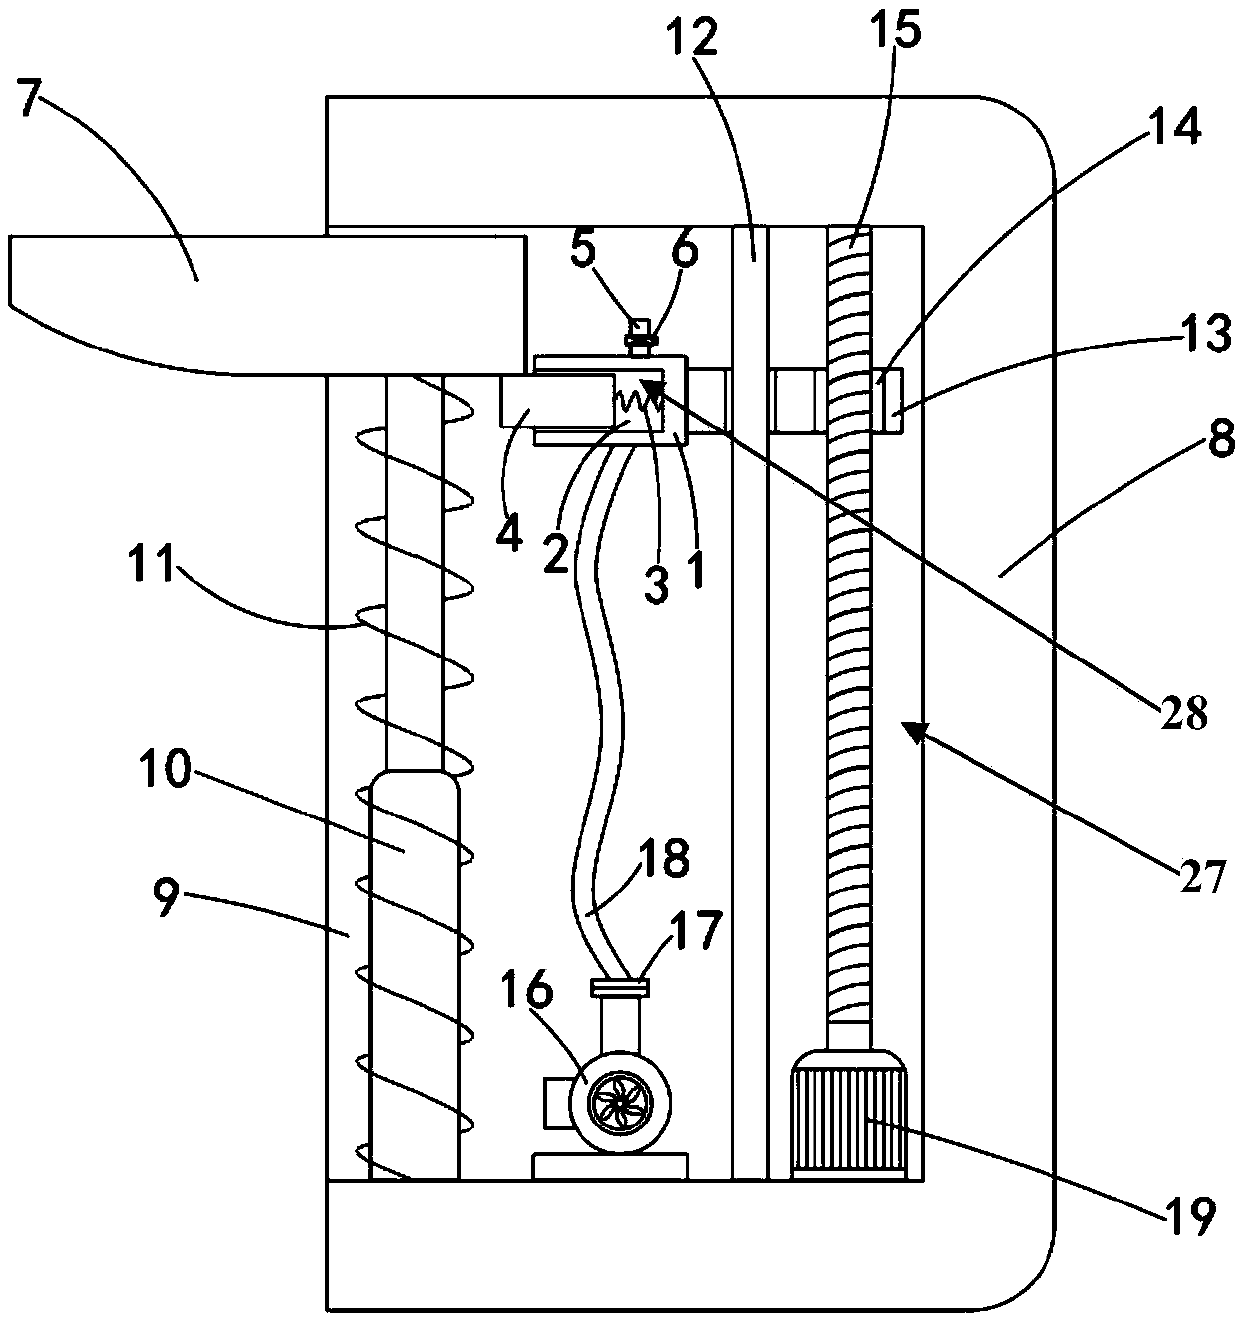 Auxiliary force augment hammer mechanism for power system operating rod